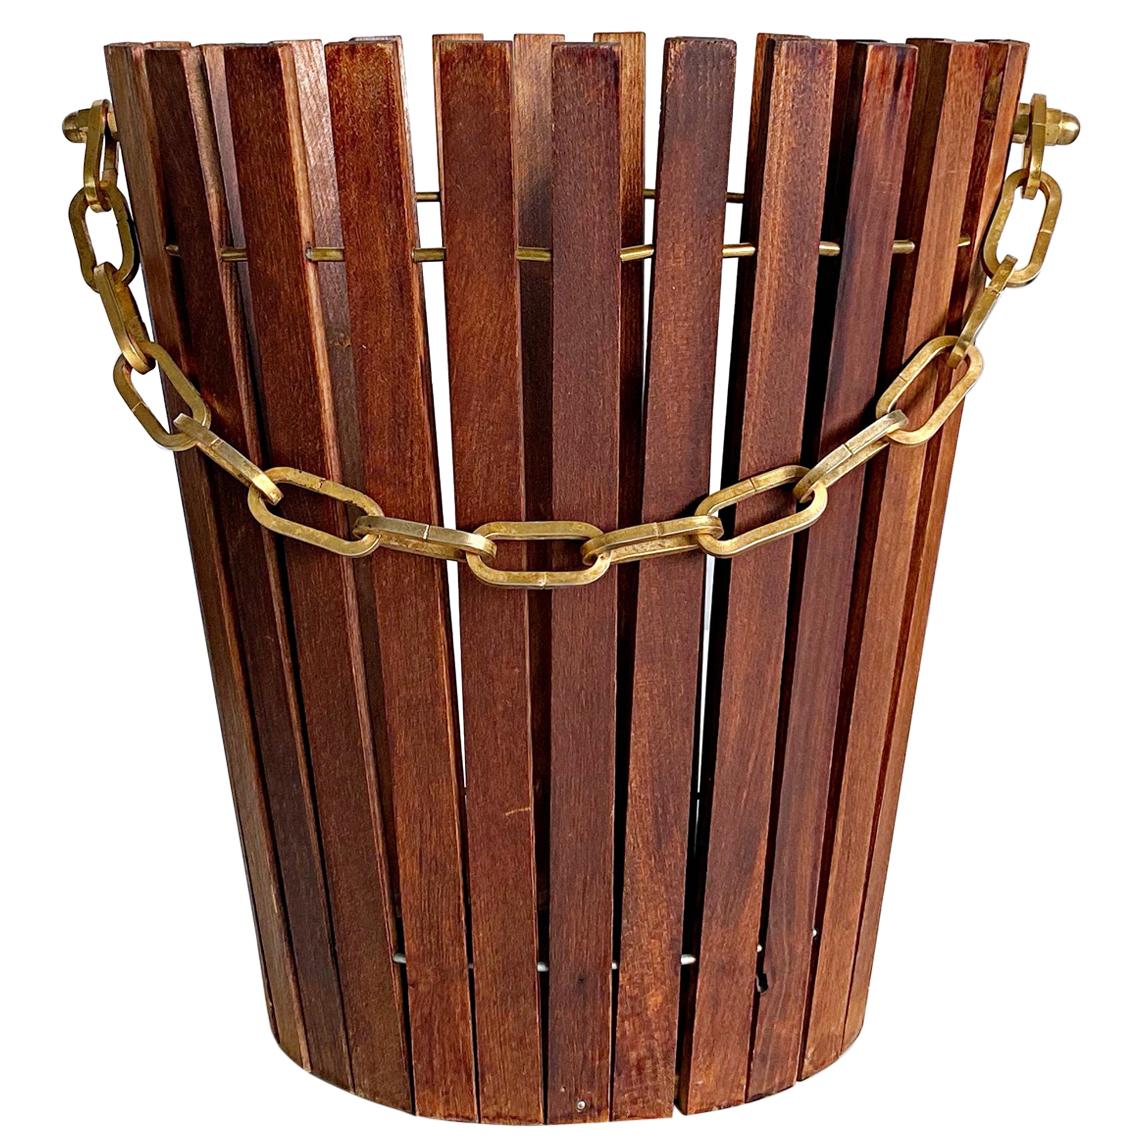 Midcentury Wood & Brass Chain Umbrella Stand or Waste Basket, 1950s, Italy